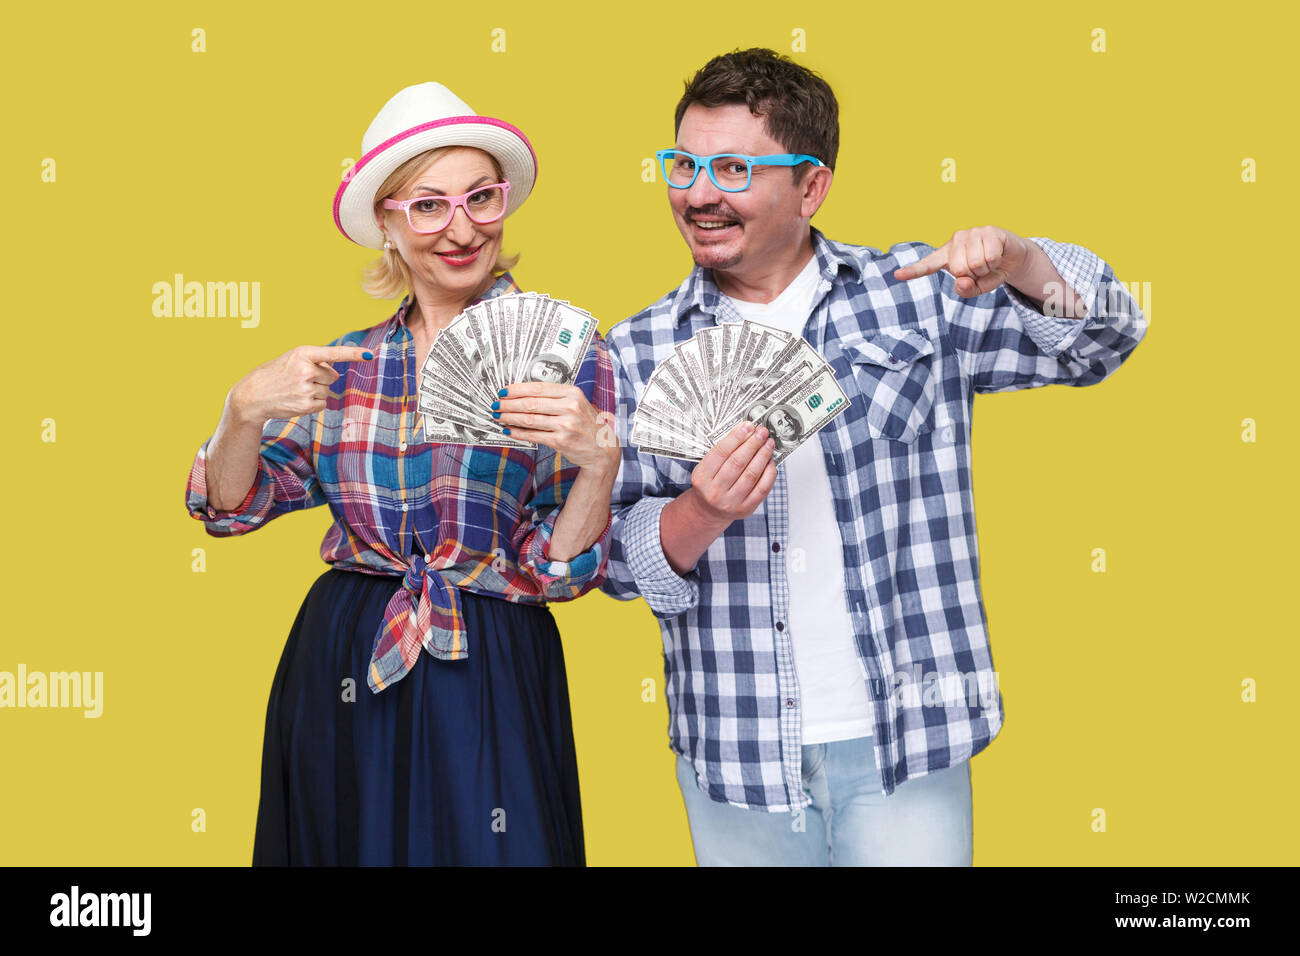 Couple of wealthy friends, adult man and woman in casual checkered shirt standing together holding fan of dollars and pointing fingers, toothy smile, Stock Photo